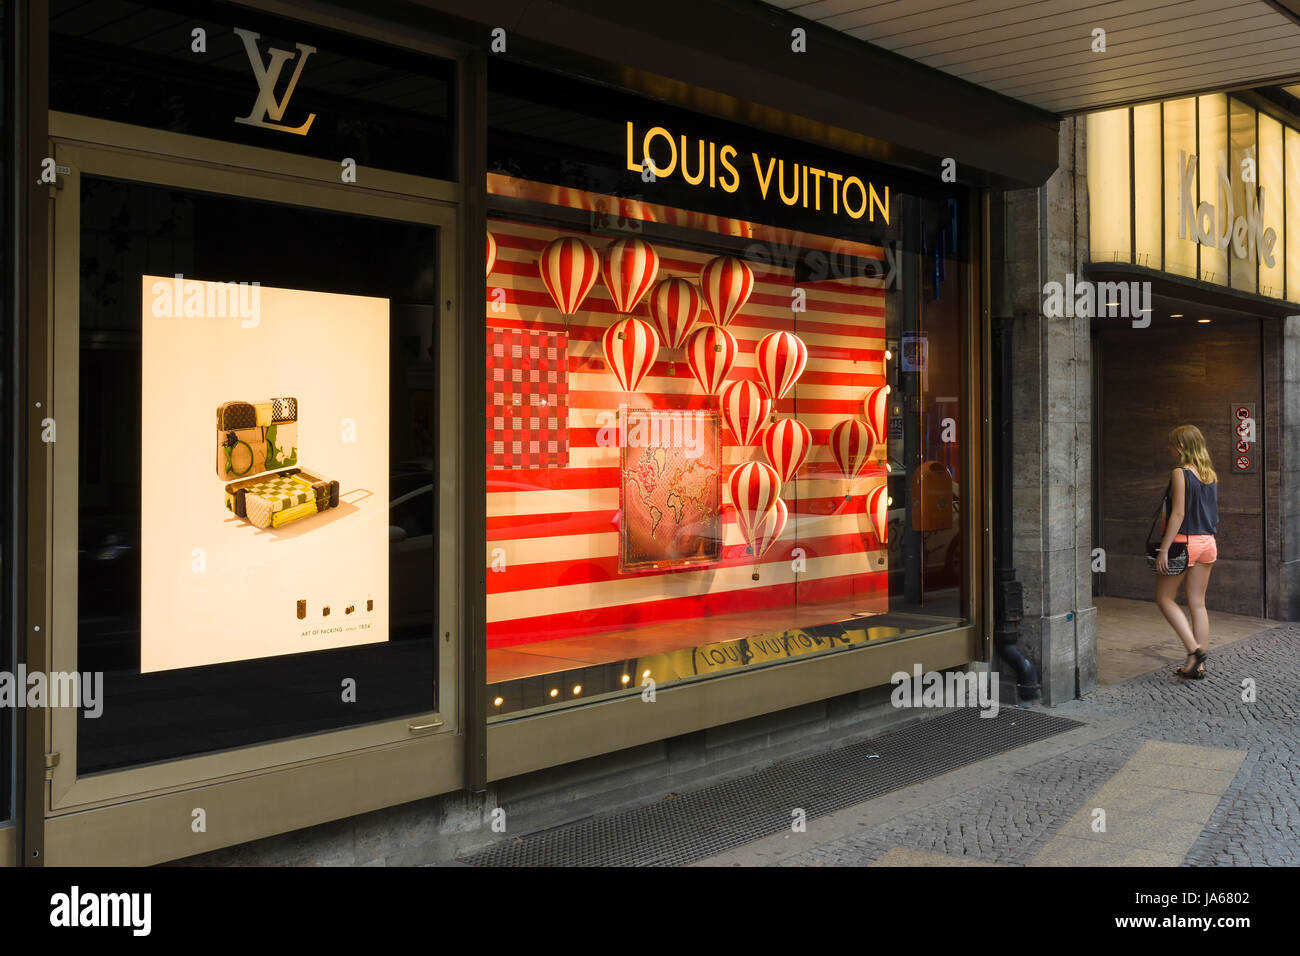 Love these pictures via @gofutureny ❤️ #louisvuitton